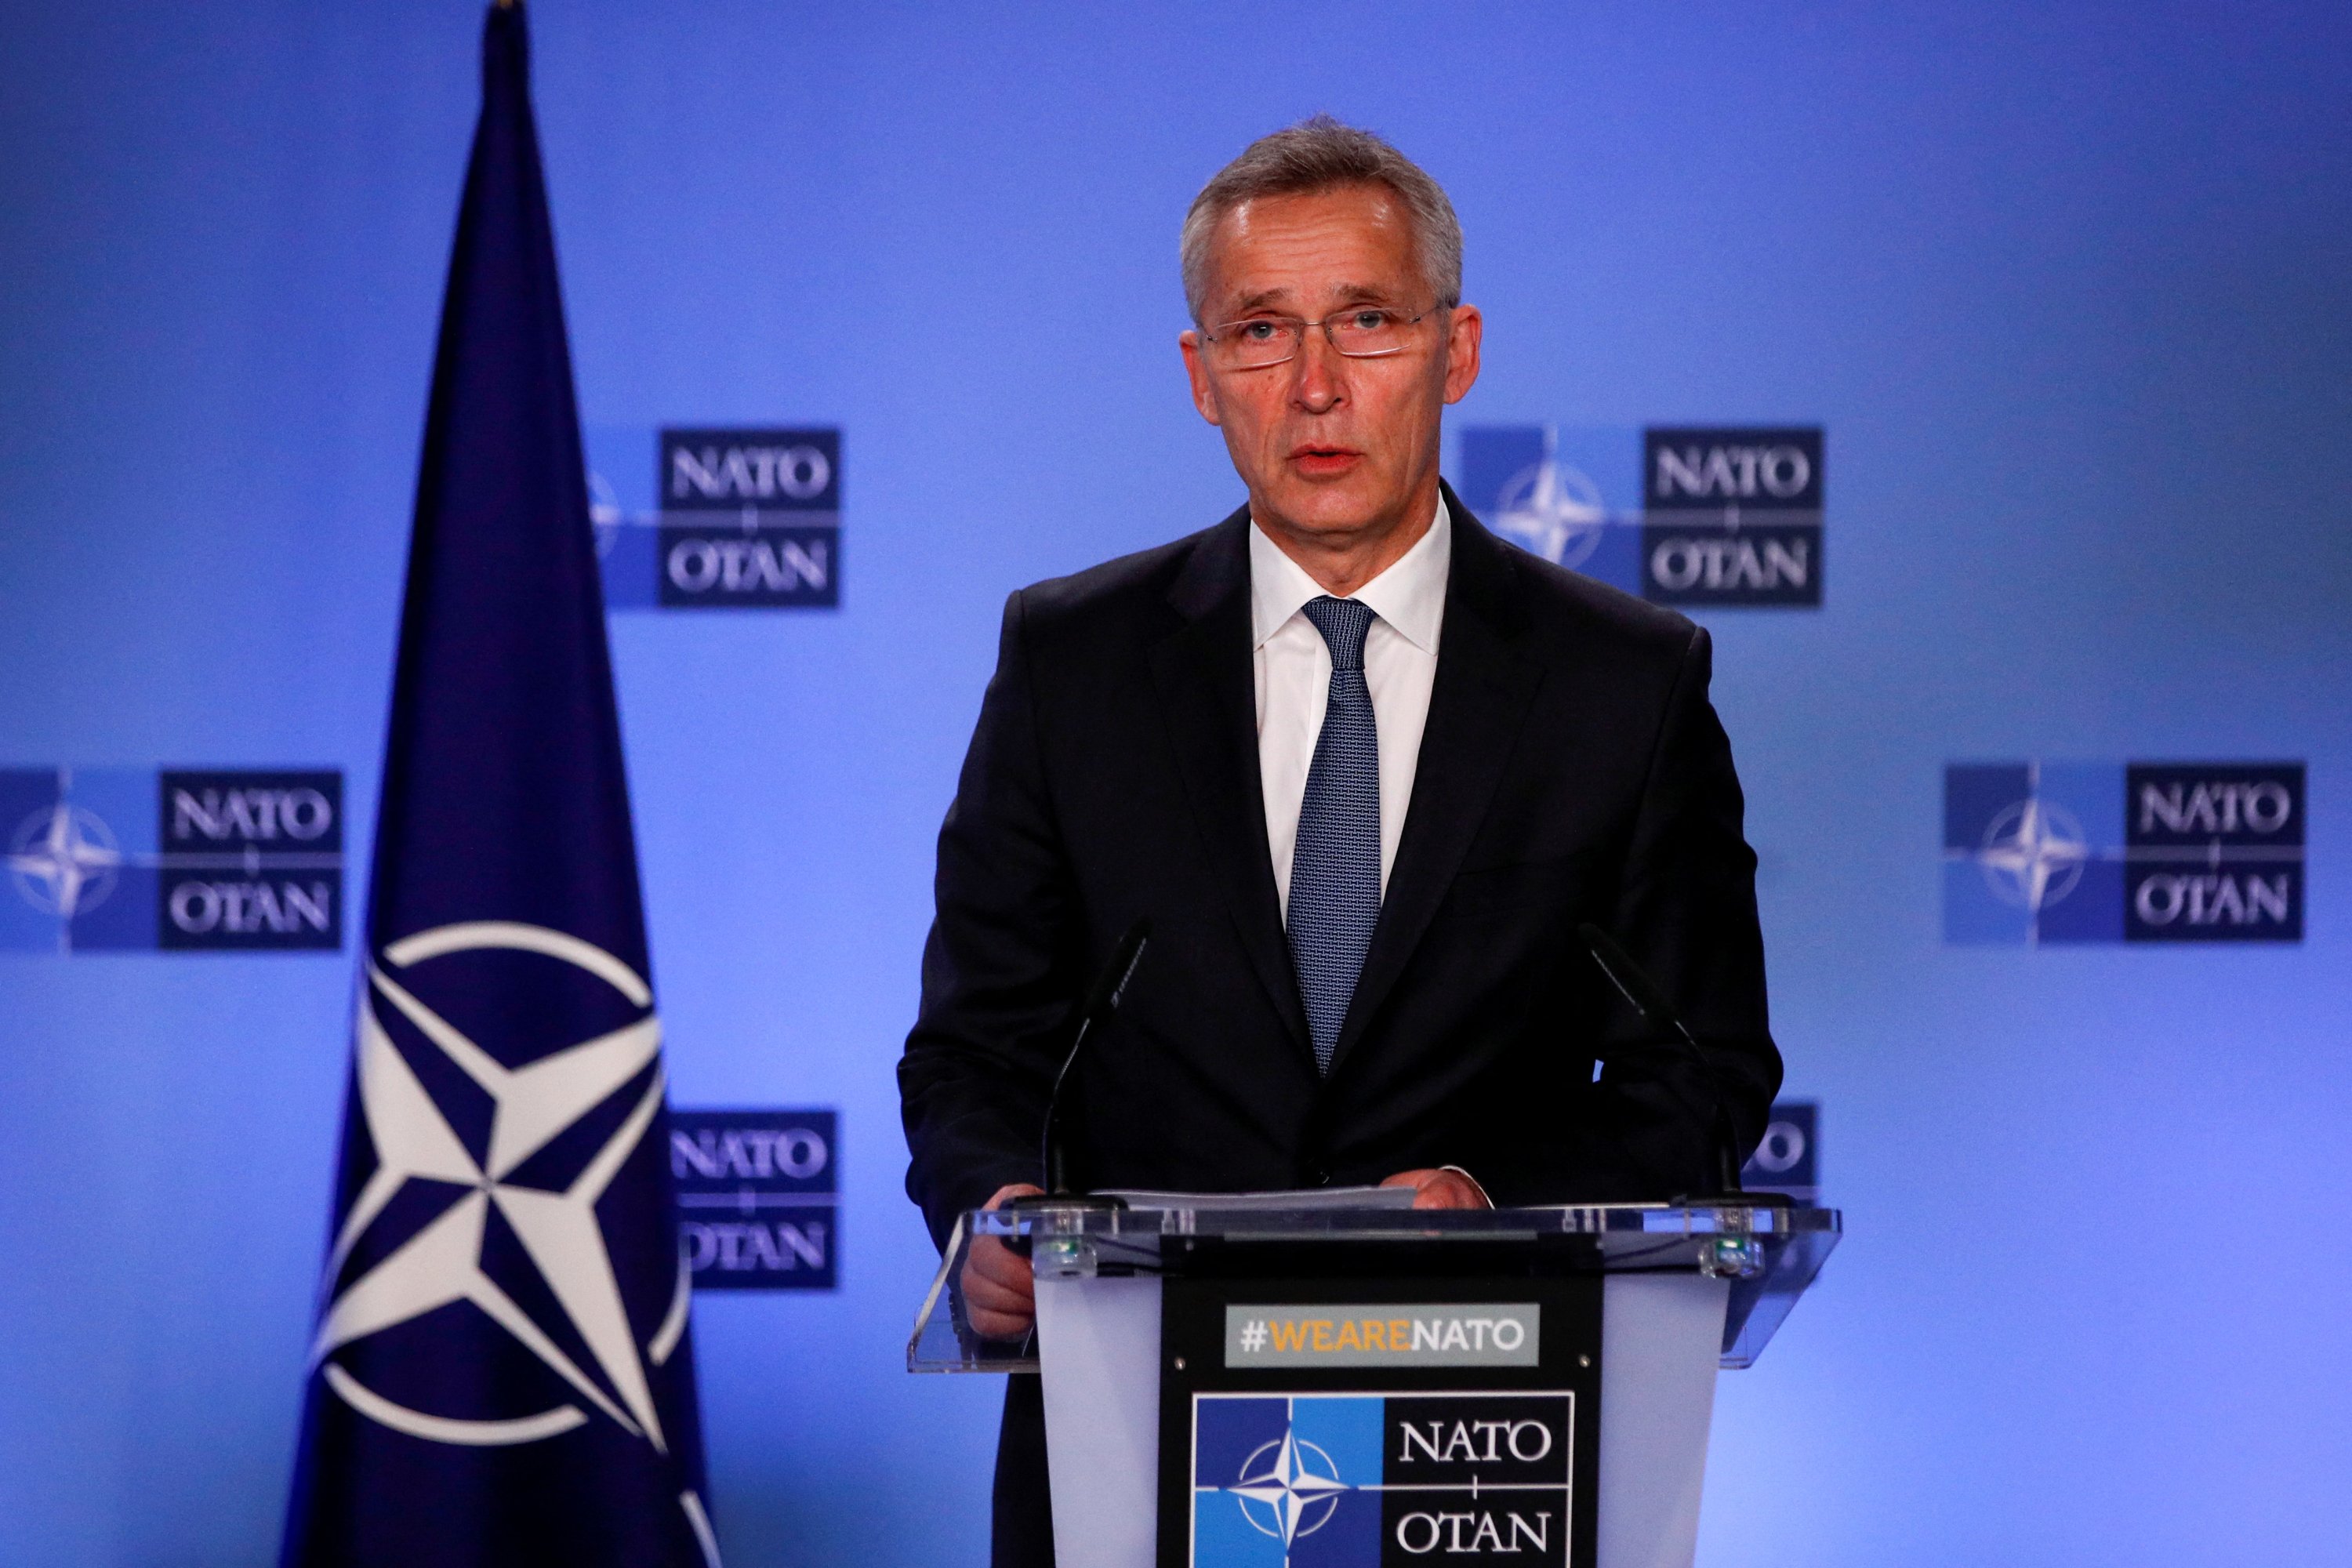 NATO chief thanks Erdoğan for efforts to solve Ukraine-Russia crisis | Daily Sabah